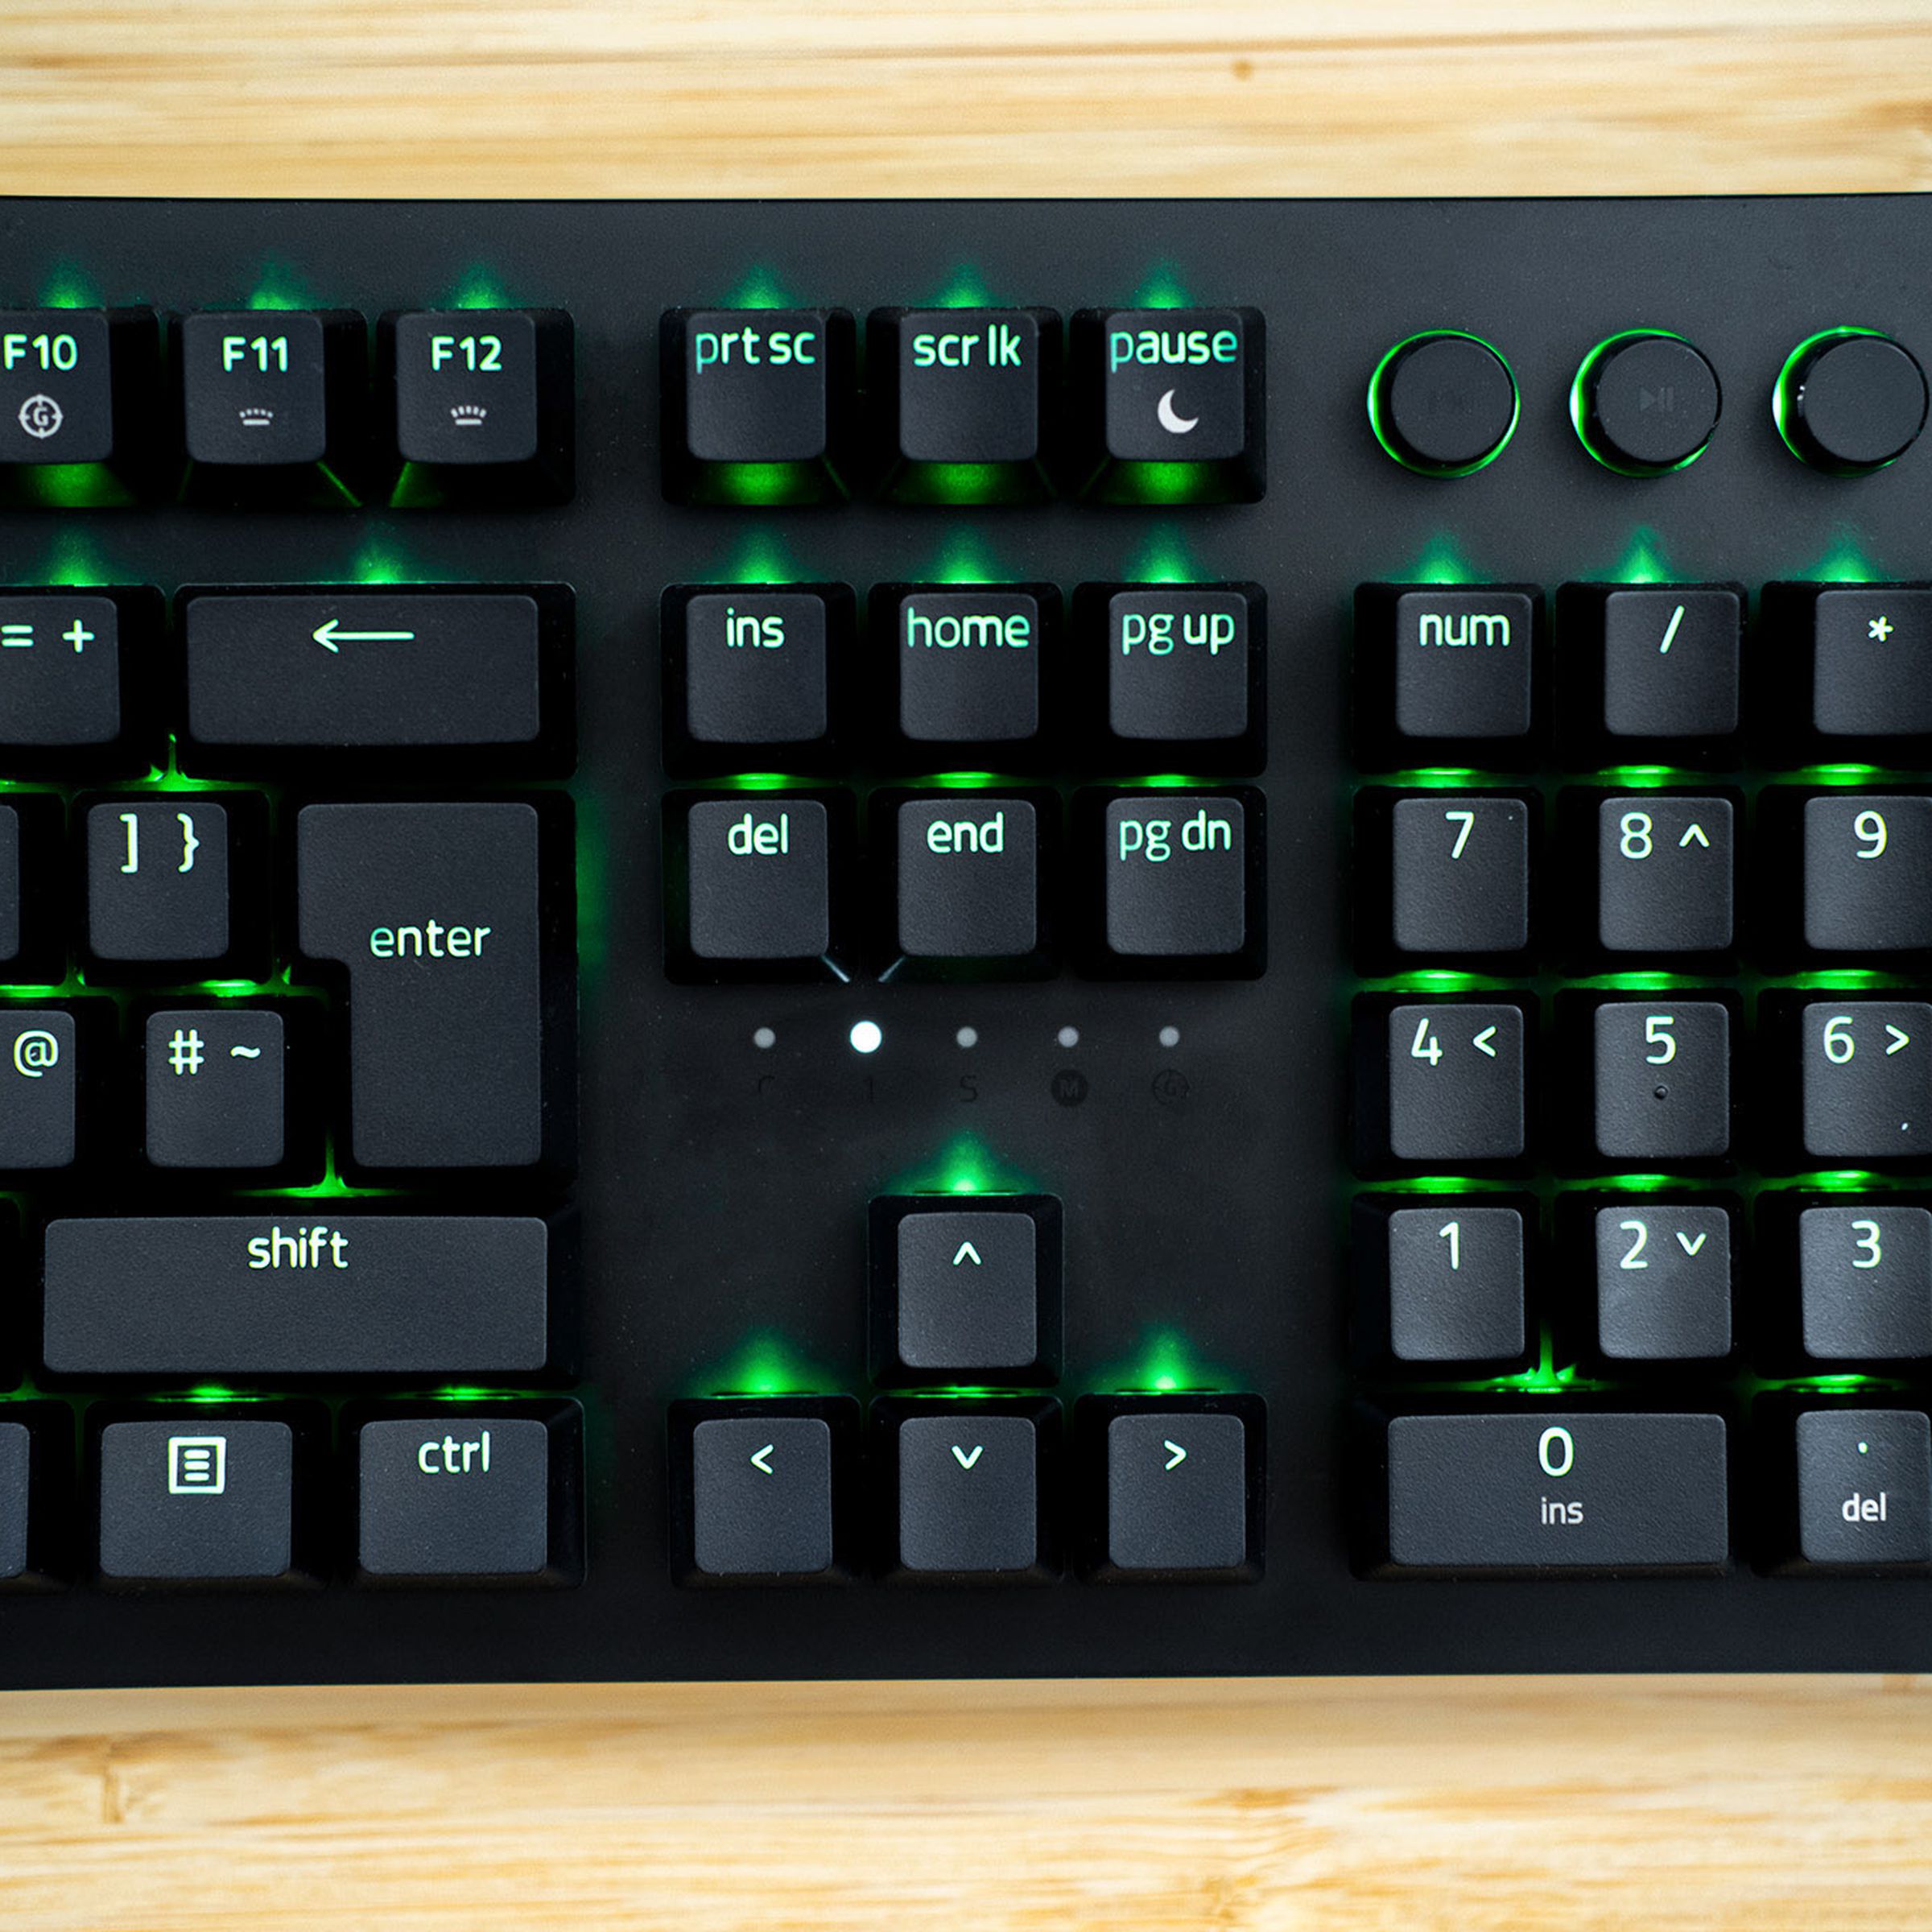 The mechanical keyboard might sell out faster than its light-based optical switches can read your keystrokes.